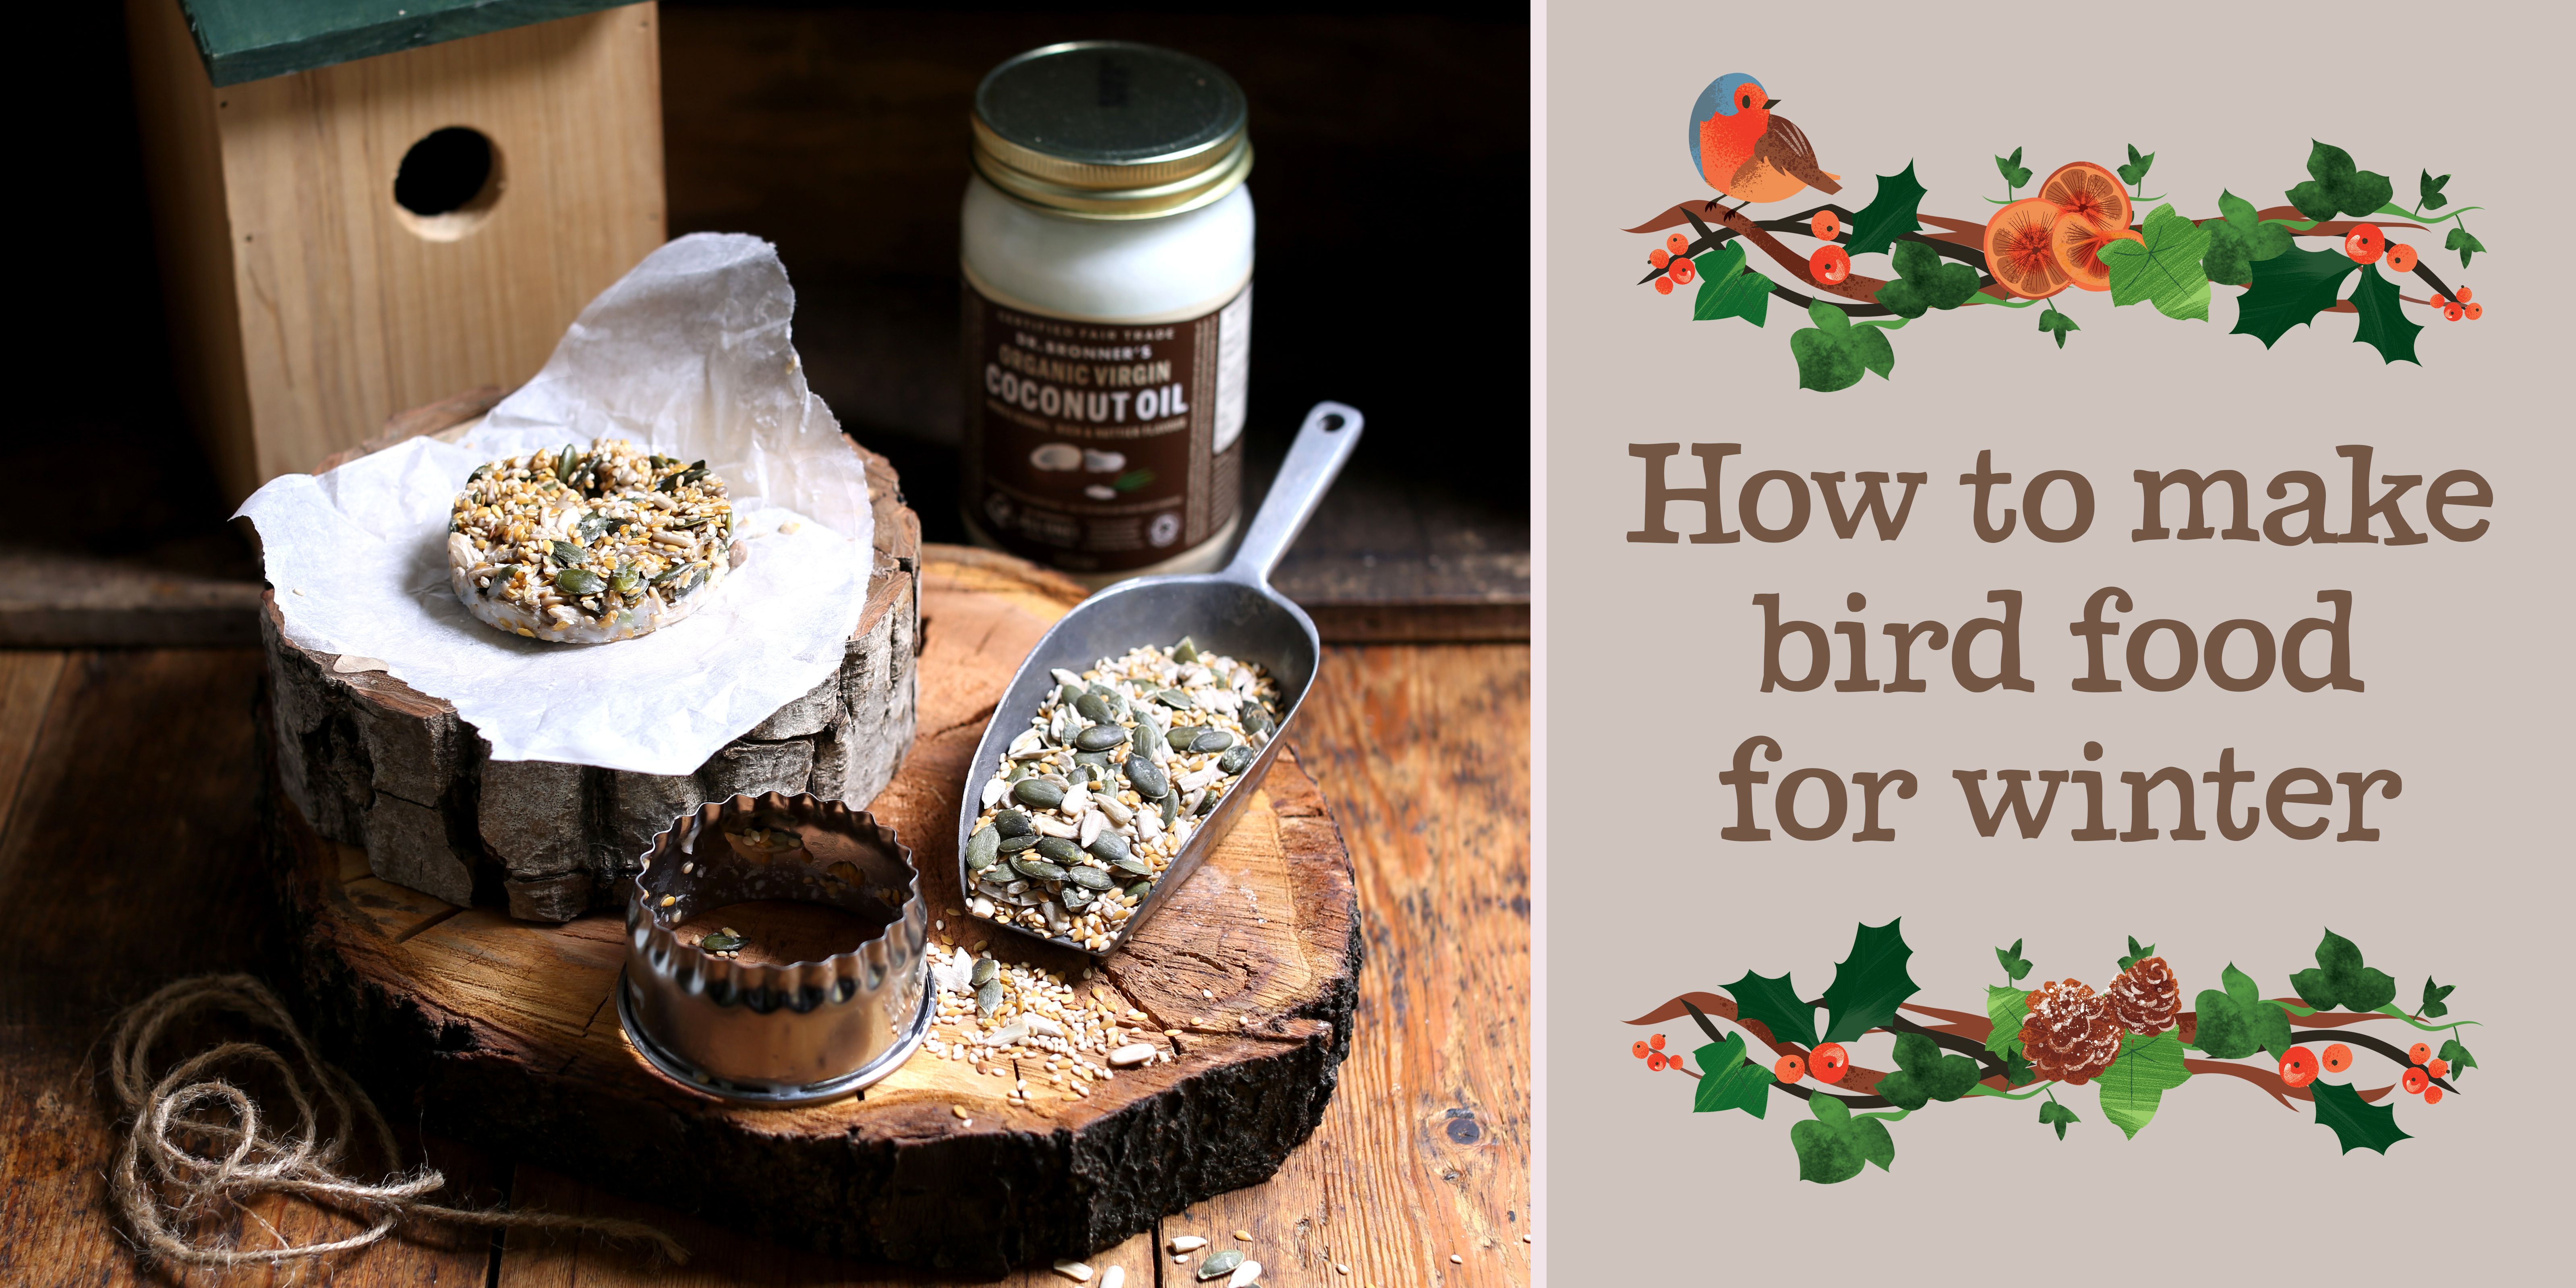 How to make bird food for winter